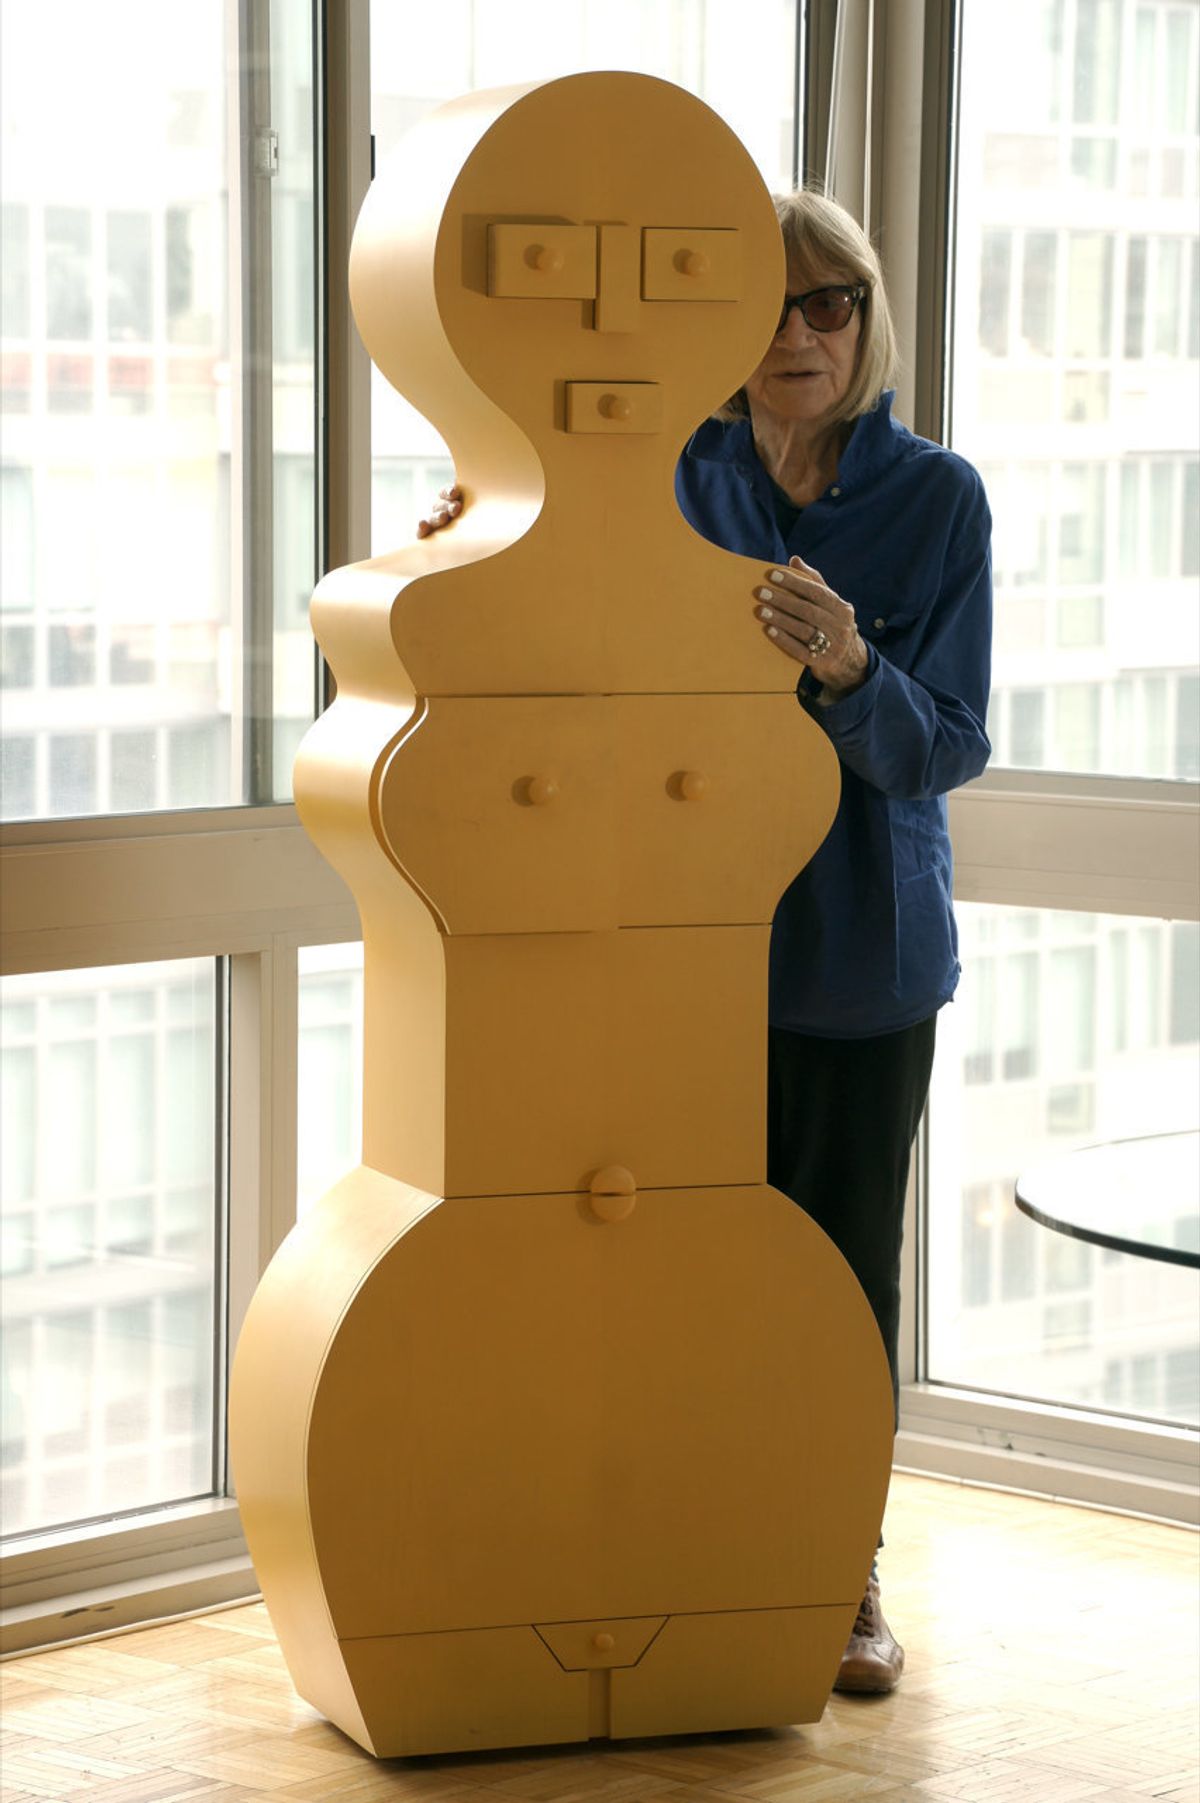 Nicola L. with "La Femme Commode" in 2017. Courtesy of SculptureCenter